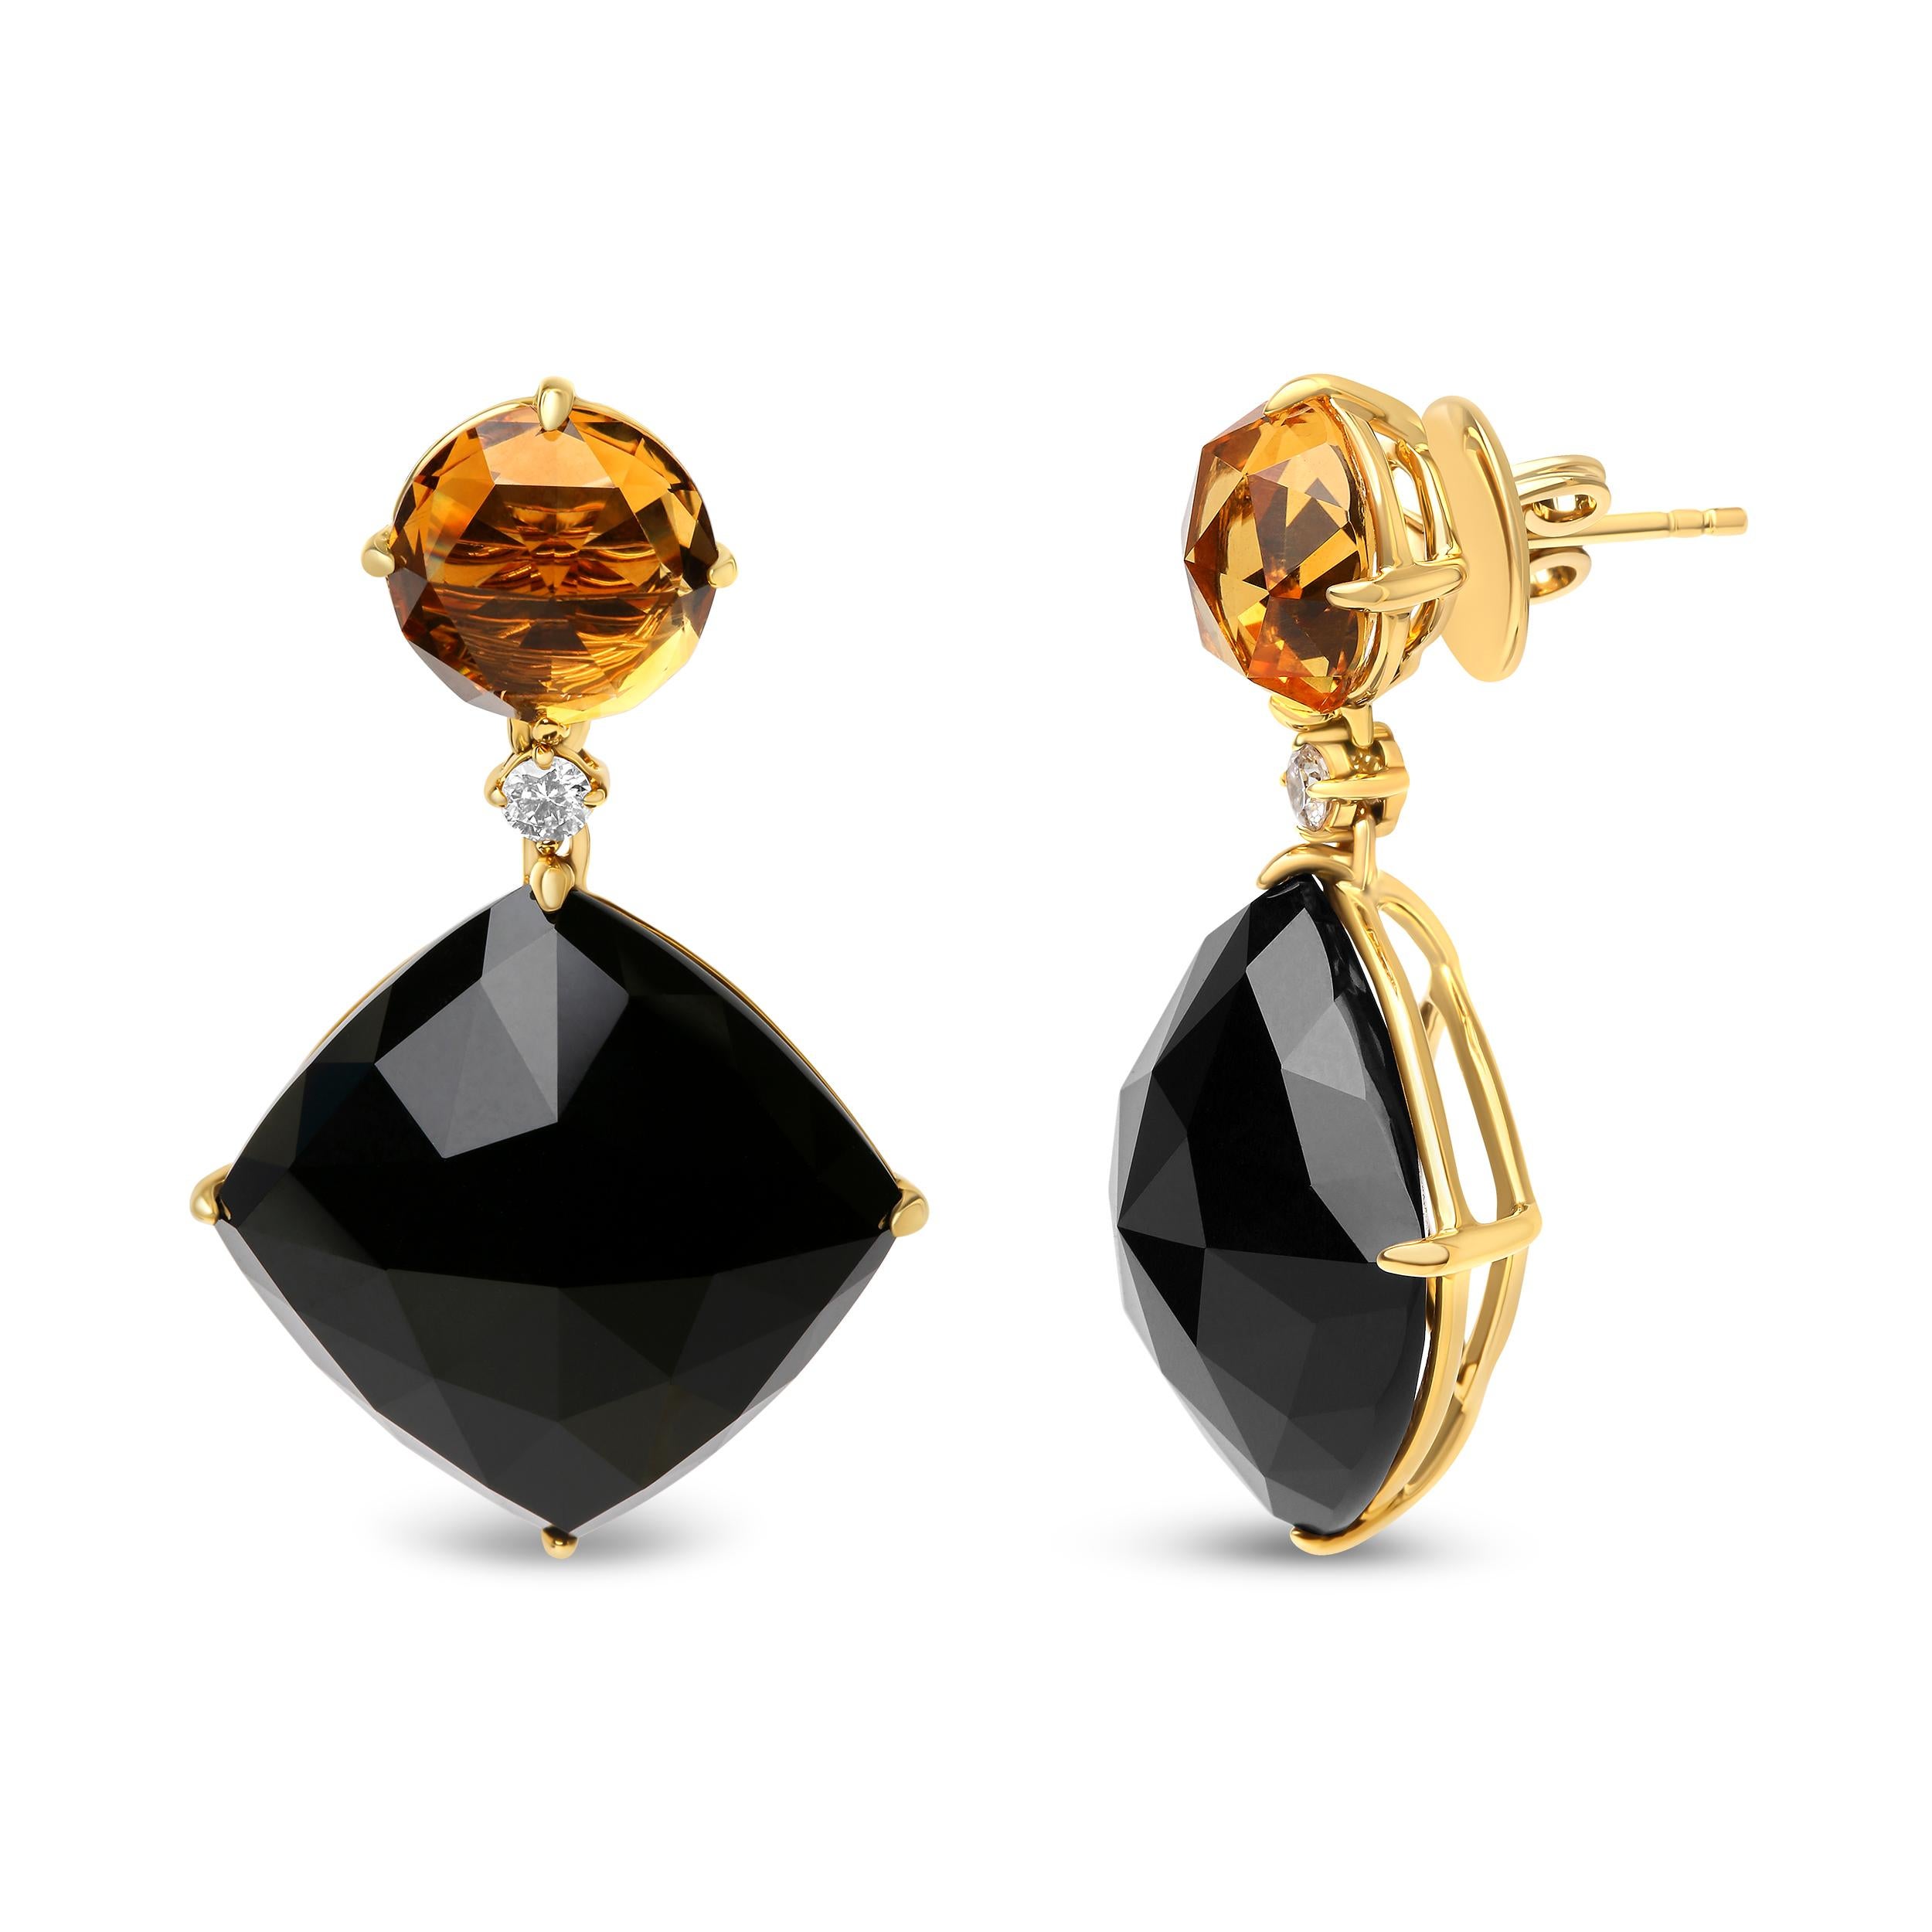 Sophisticated and alluring, these 18k yellow gold dangle earrings are ready for a night out on the town! A natural 10x10mm round heat-treated yellow citrine gemstone in a prong setting sits neatly on the upper dangle, followed by a round, prong-set